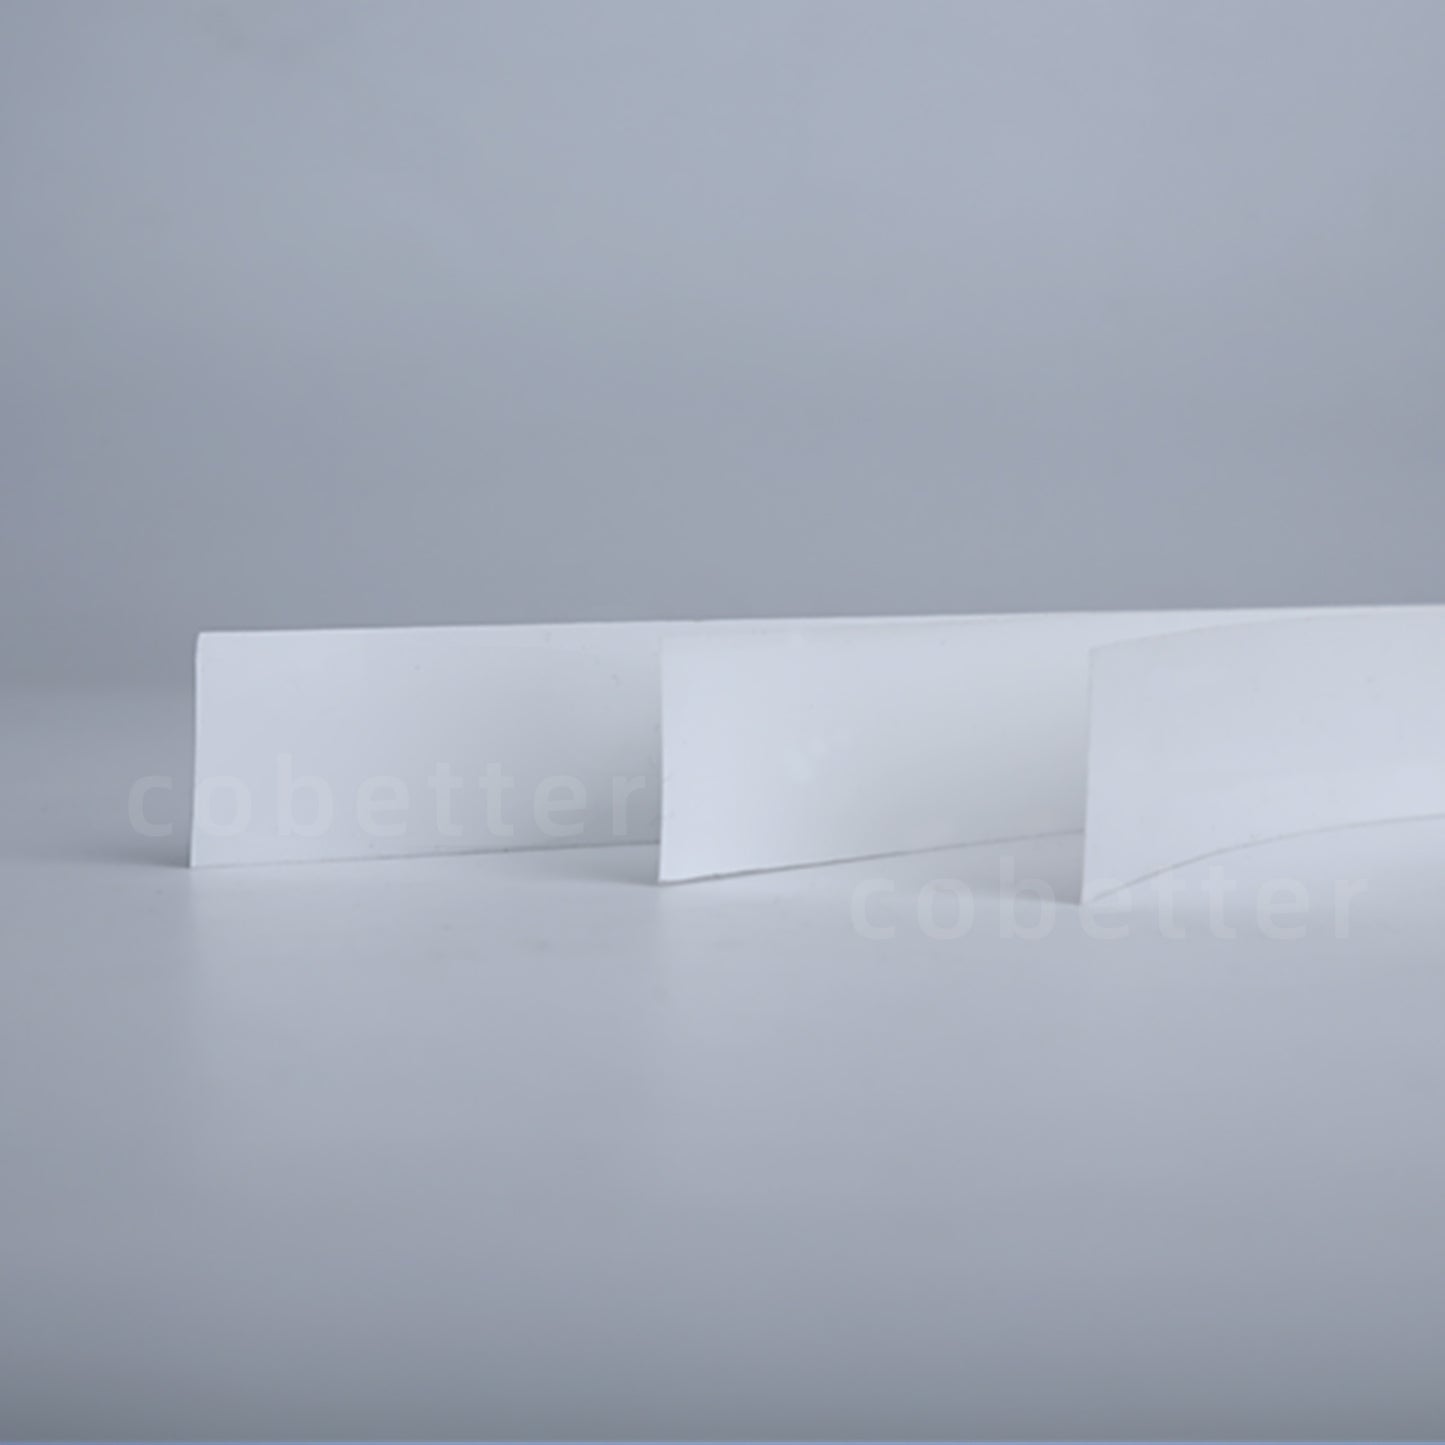 COBETTER NC140C Nitrocellulose (NC) Membrane for Lateral Flow Immunochromatography Tests